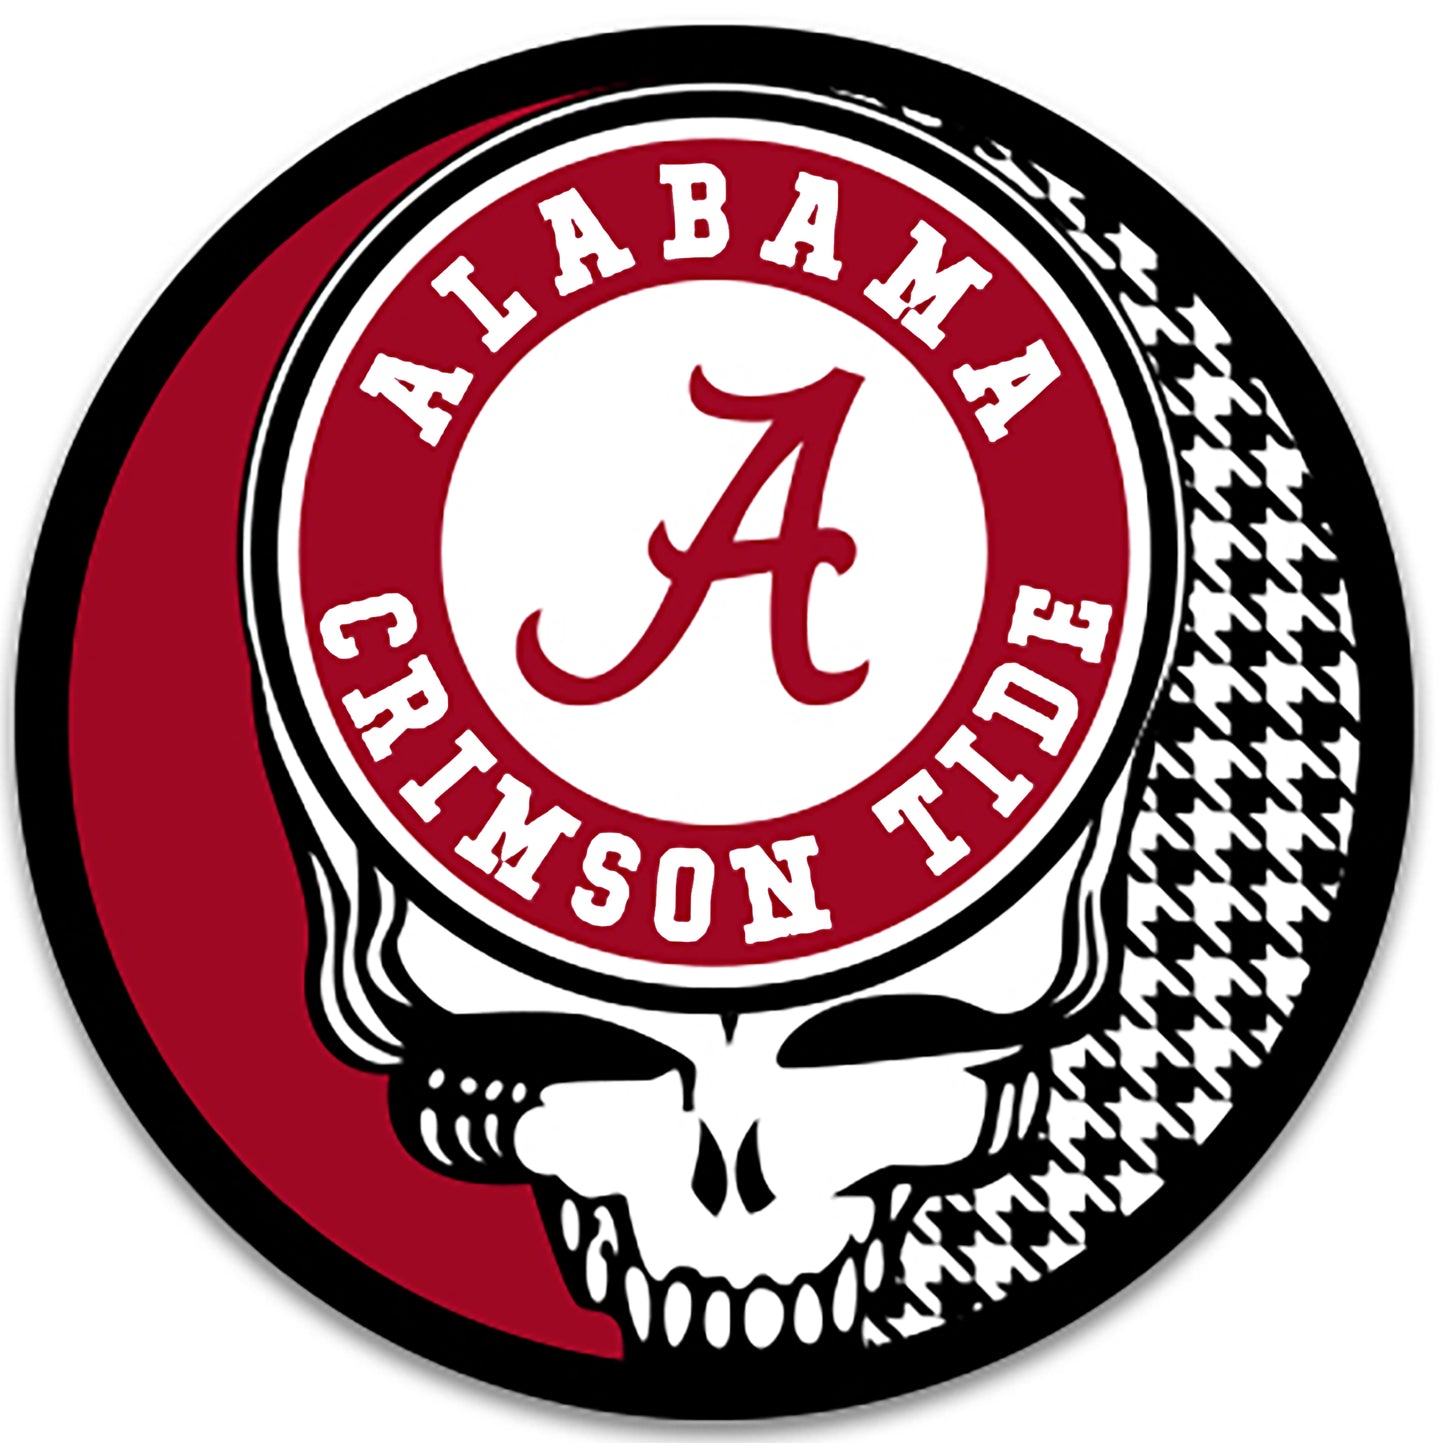 Alabama Crimson Tide SYF heat applied patches. Very High end